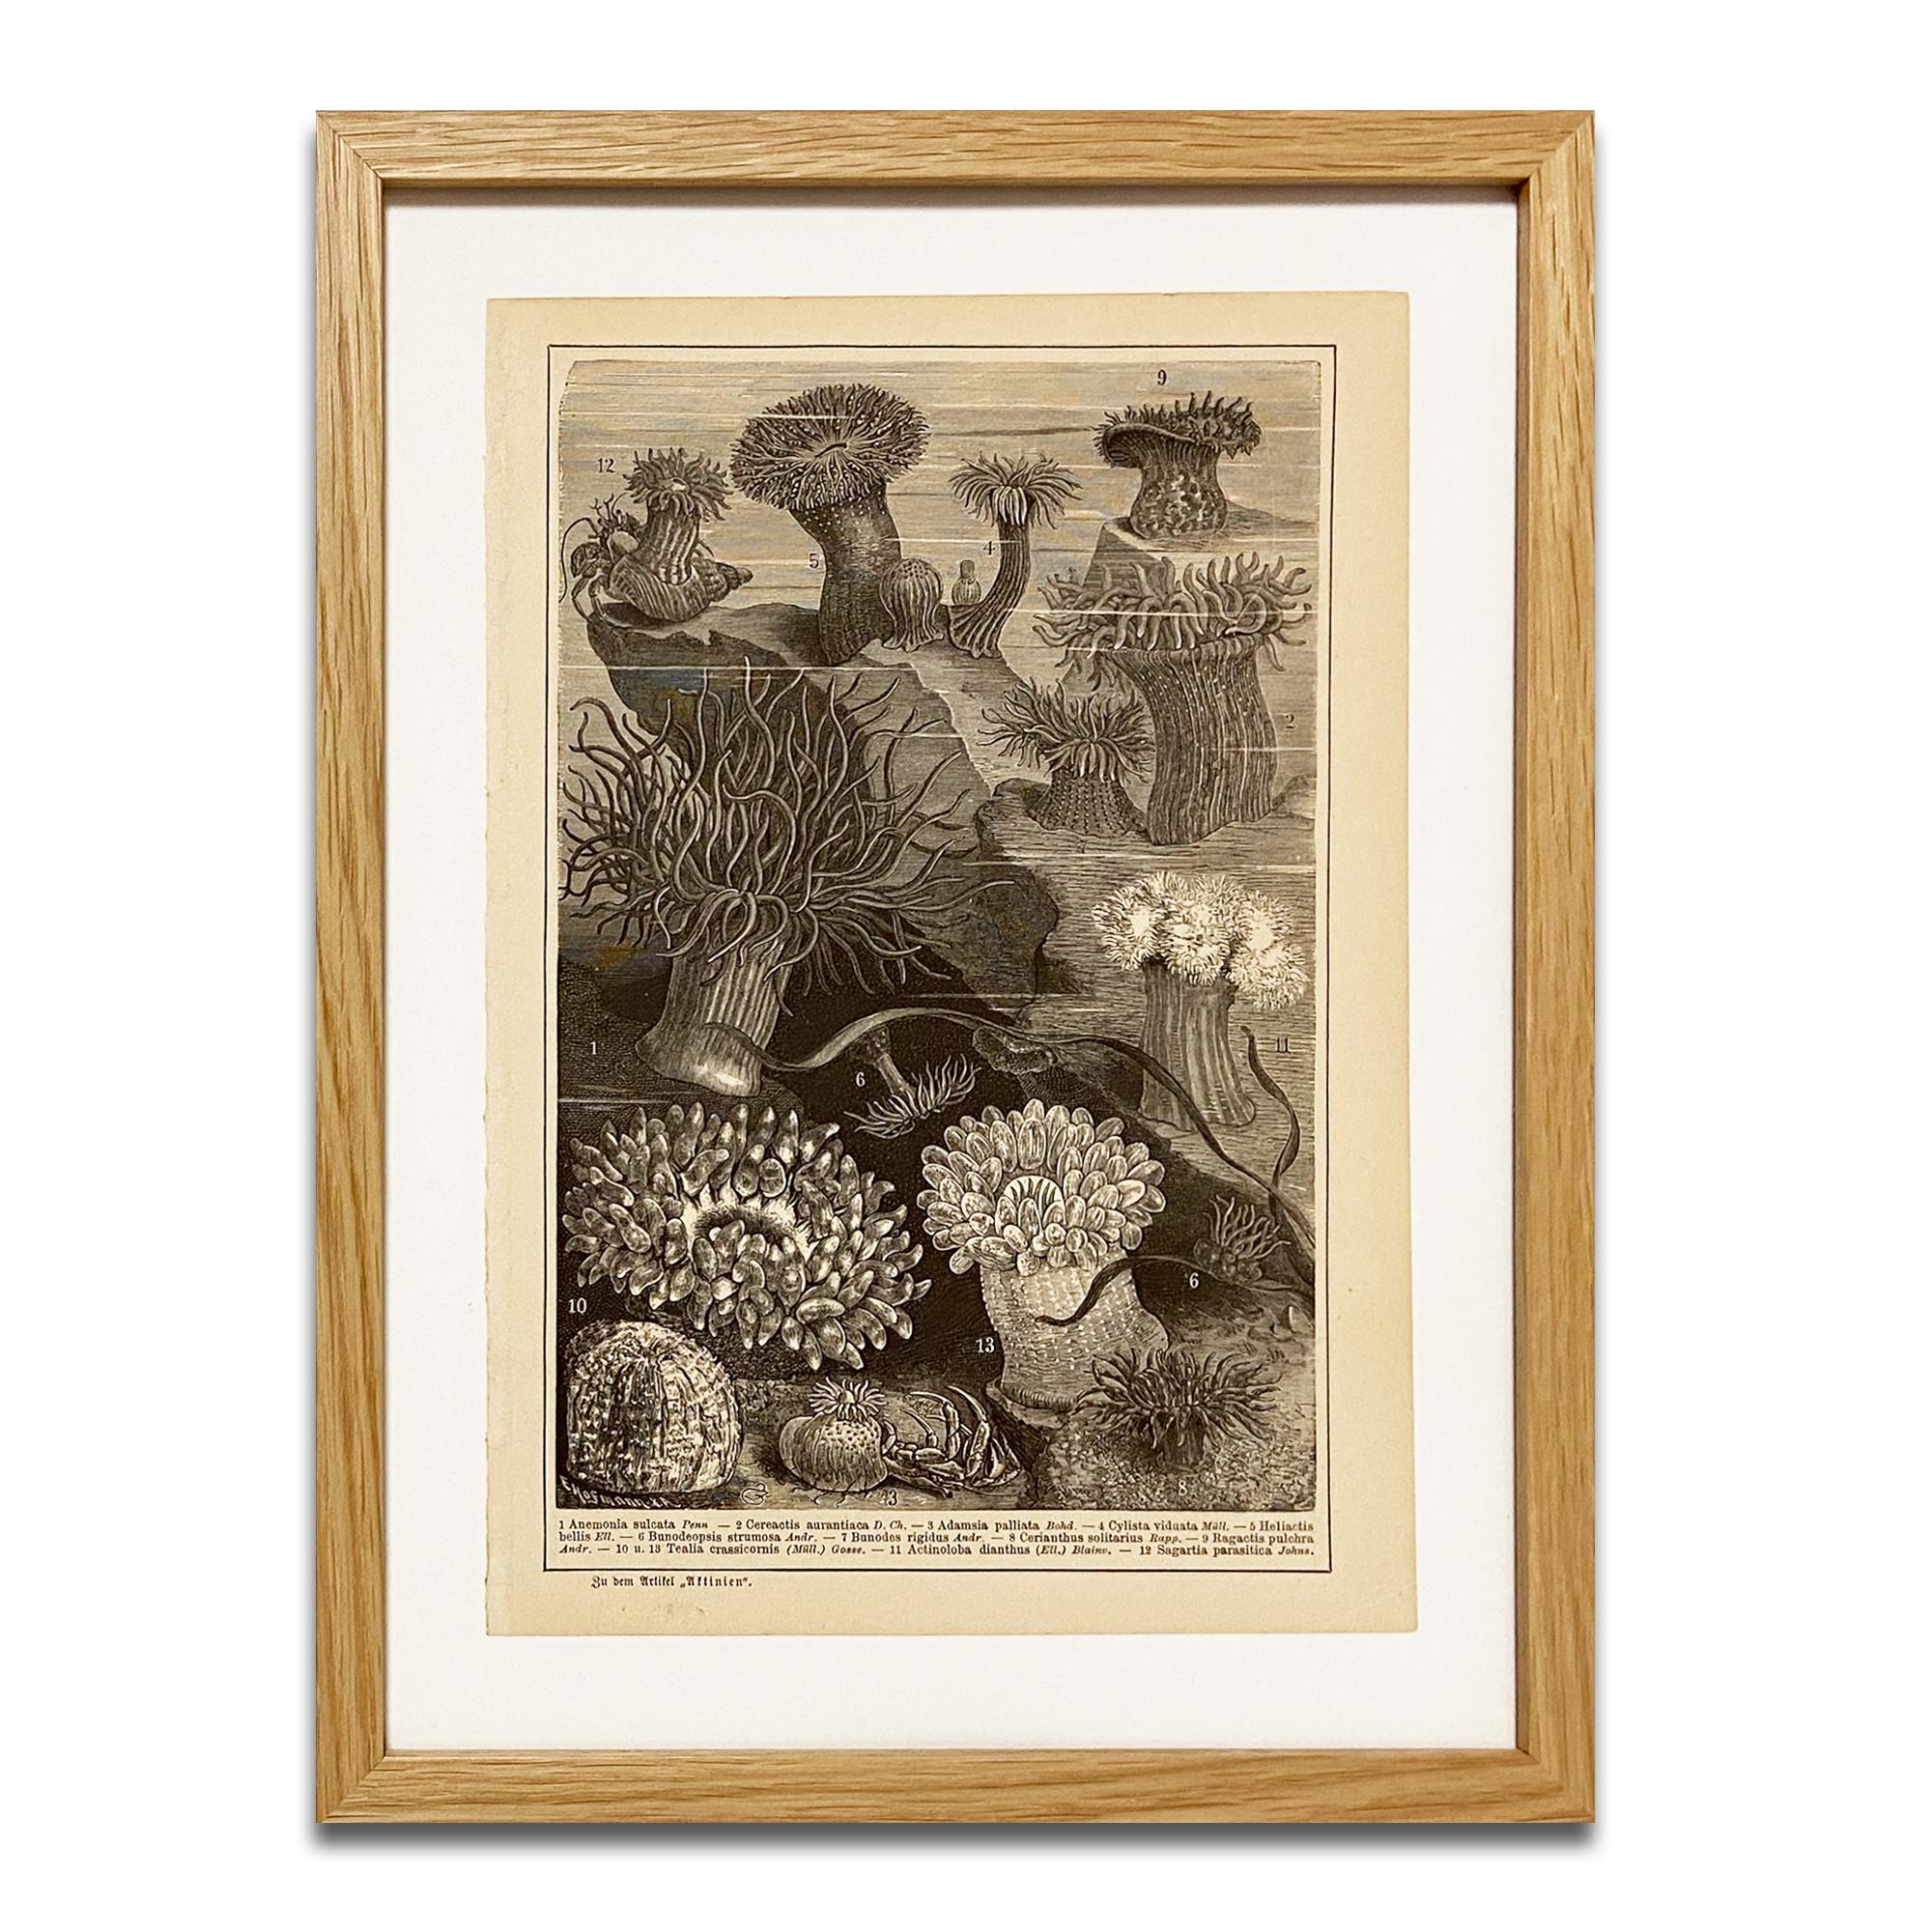 Unknown Still-Life Print - Anemone Print in Wooded Frame, from Antiquarian Encyclopedia, Botanical Prints